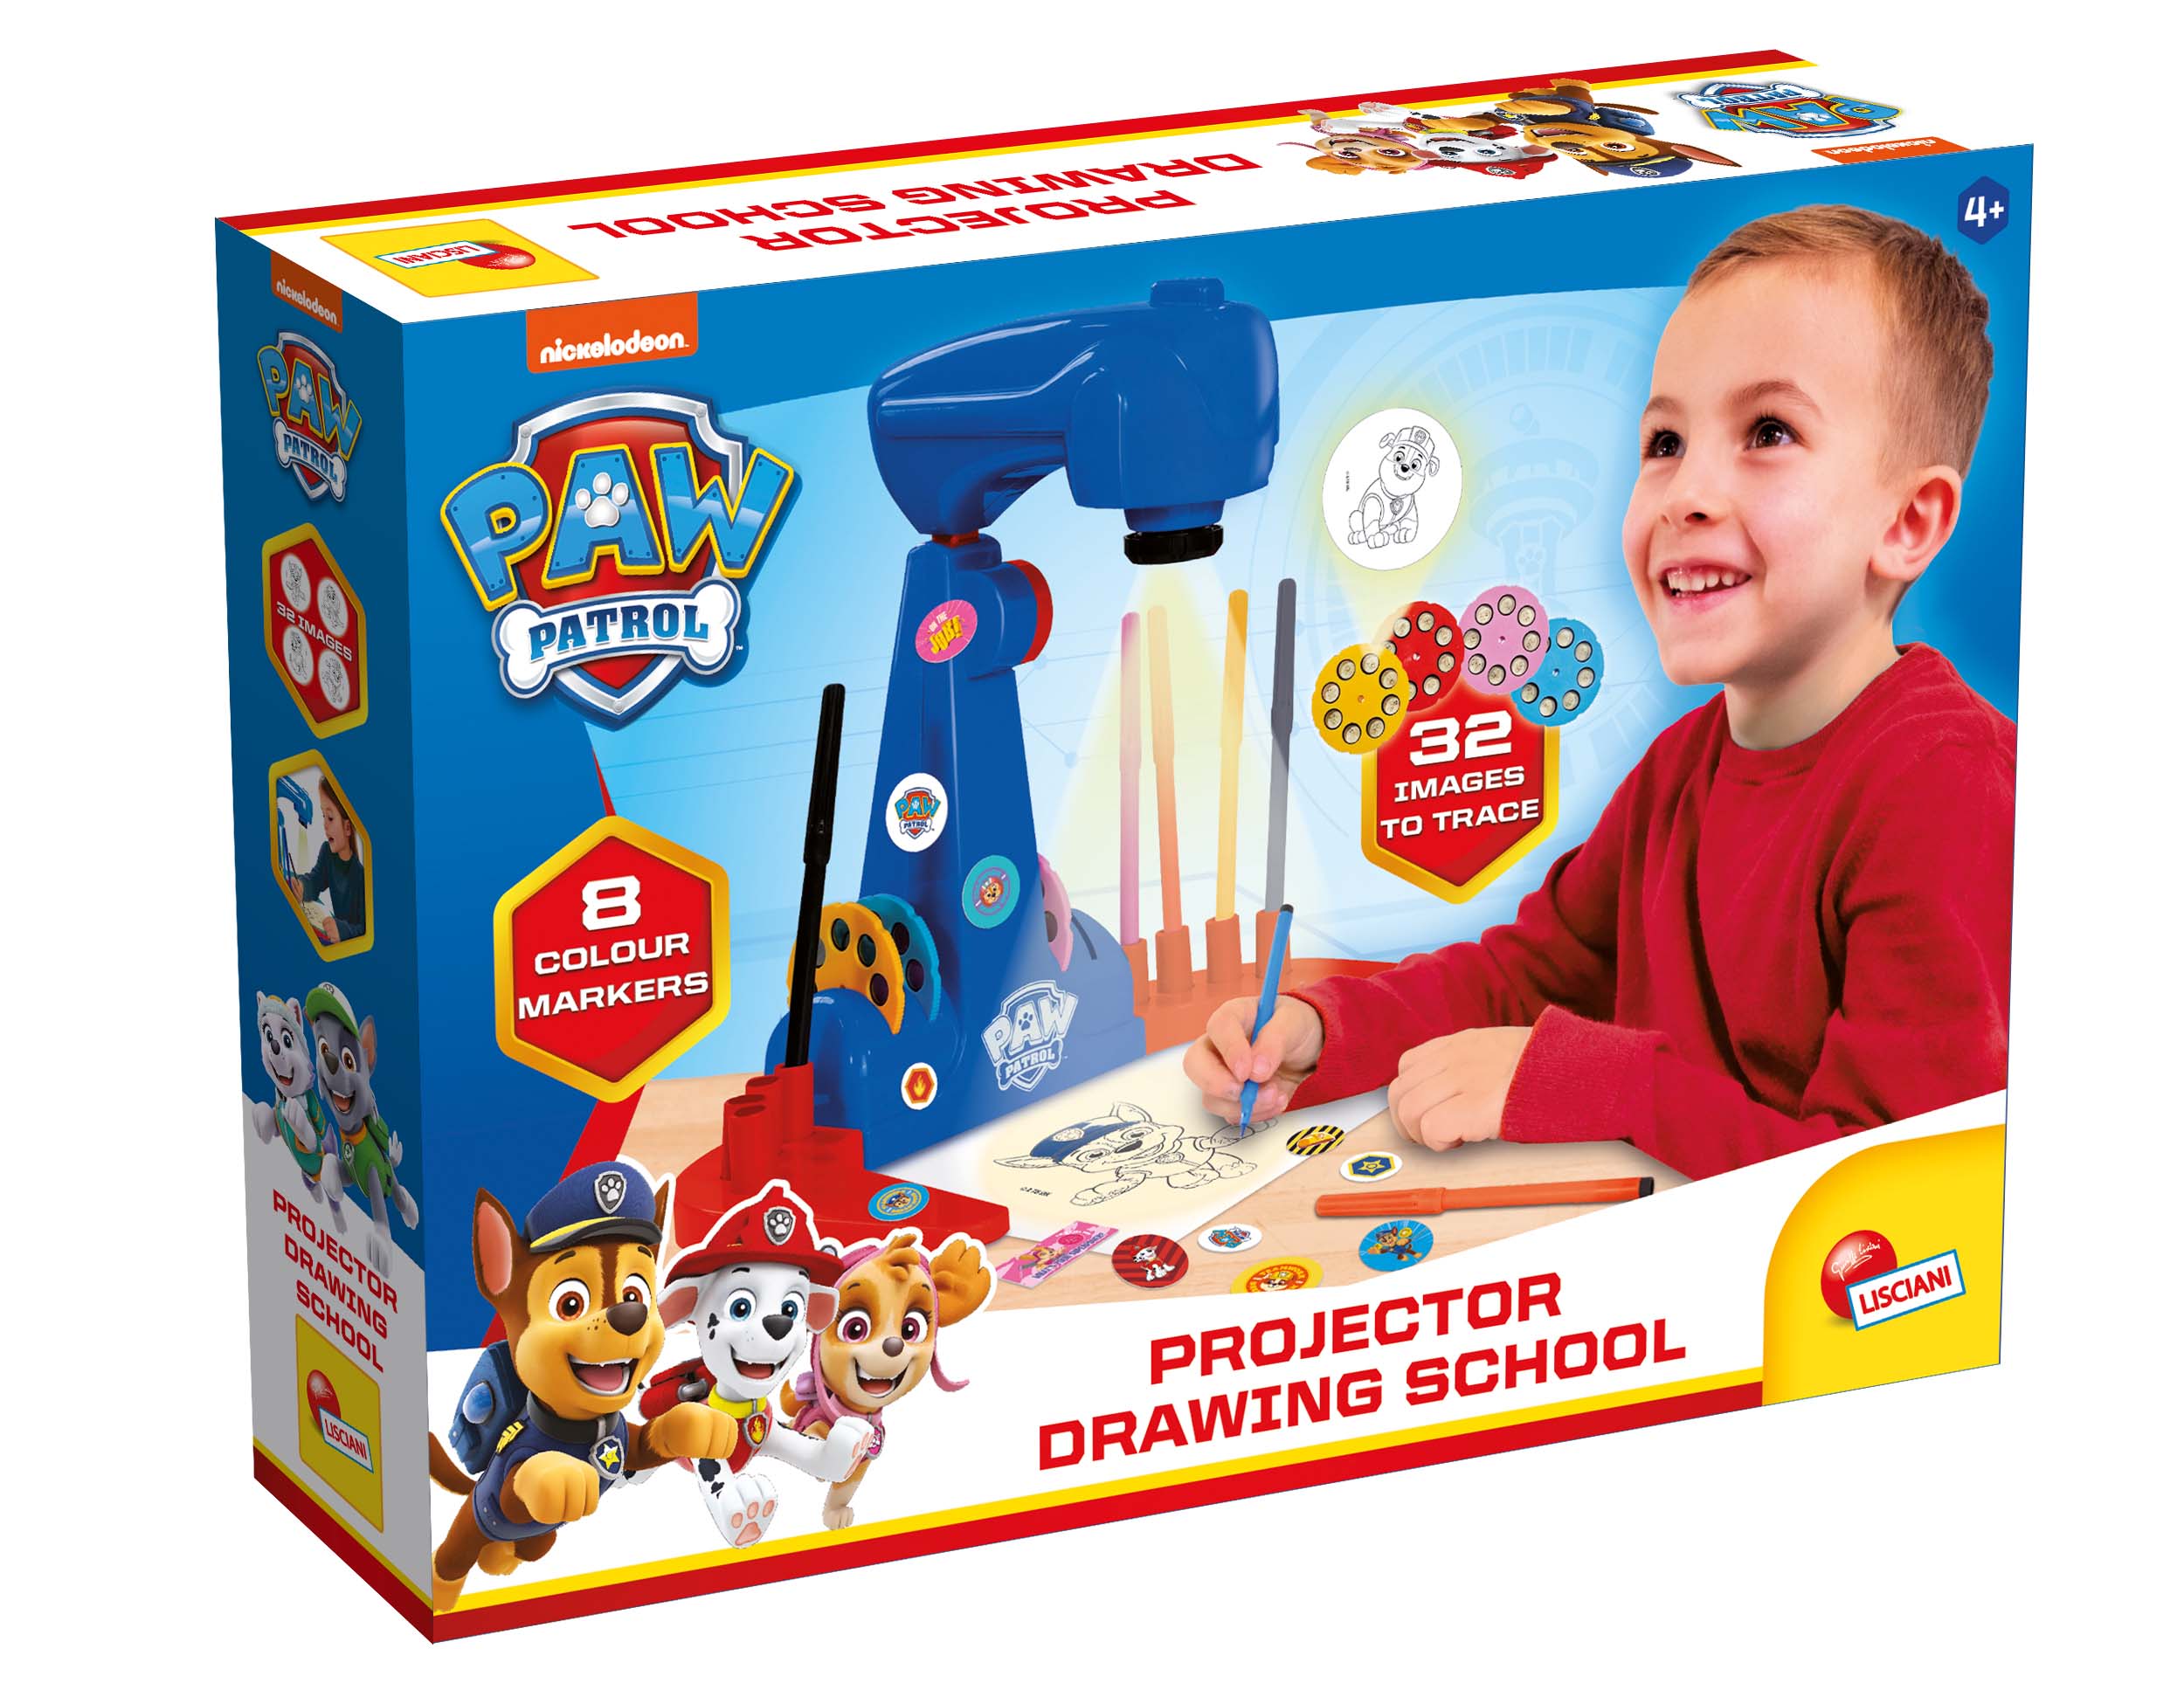 Photo 1 of the game PAW PATROL PROJECTOR DRAWING SCHOOL